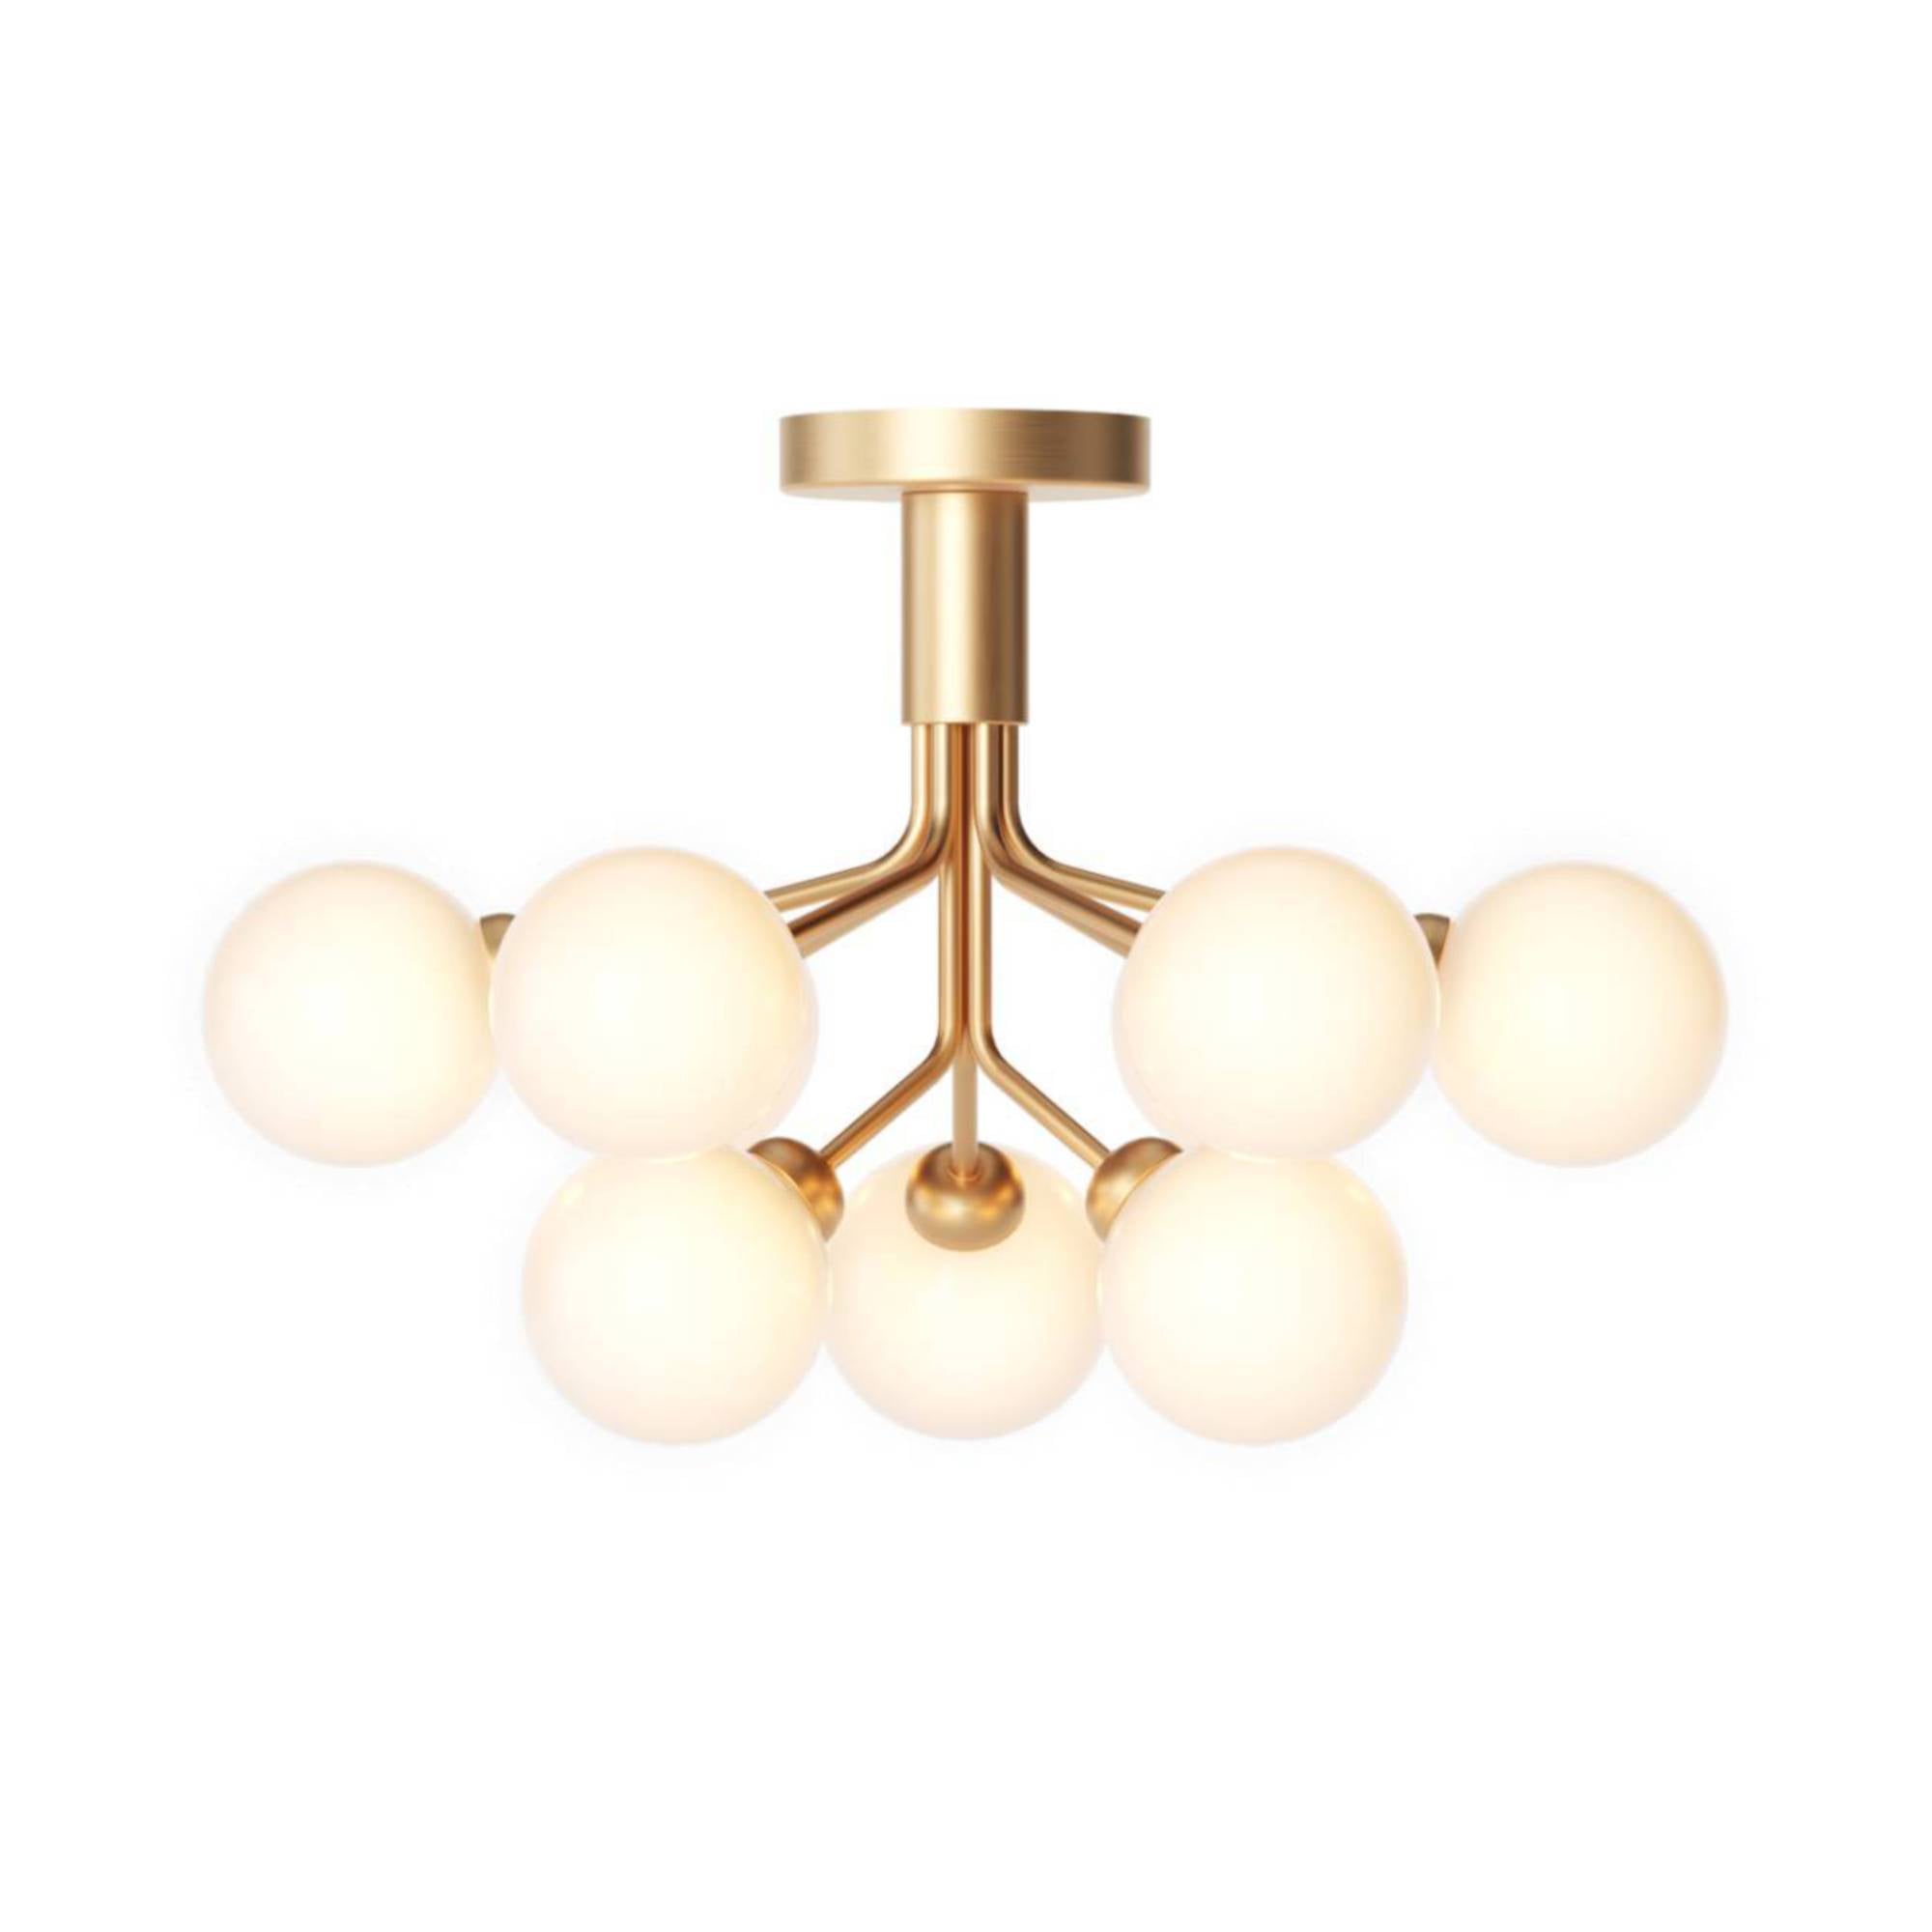 Apiales 9 Ceiling: Brushed Brass + Opal White